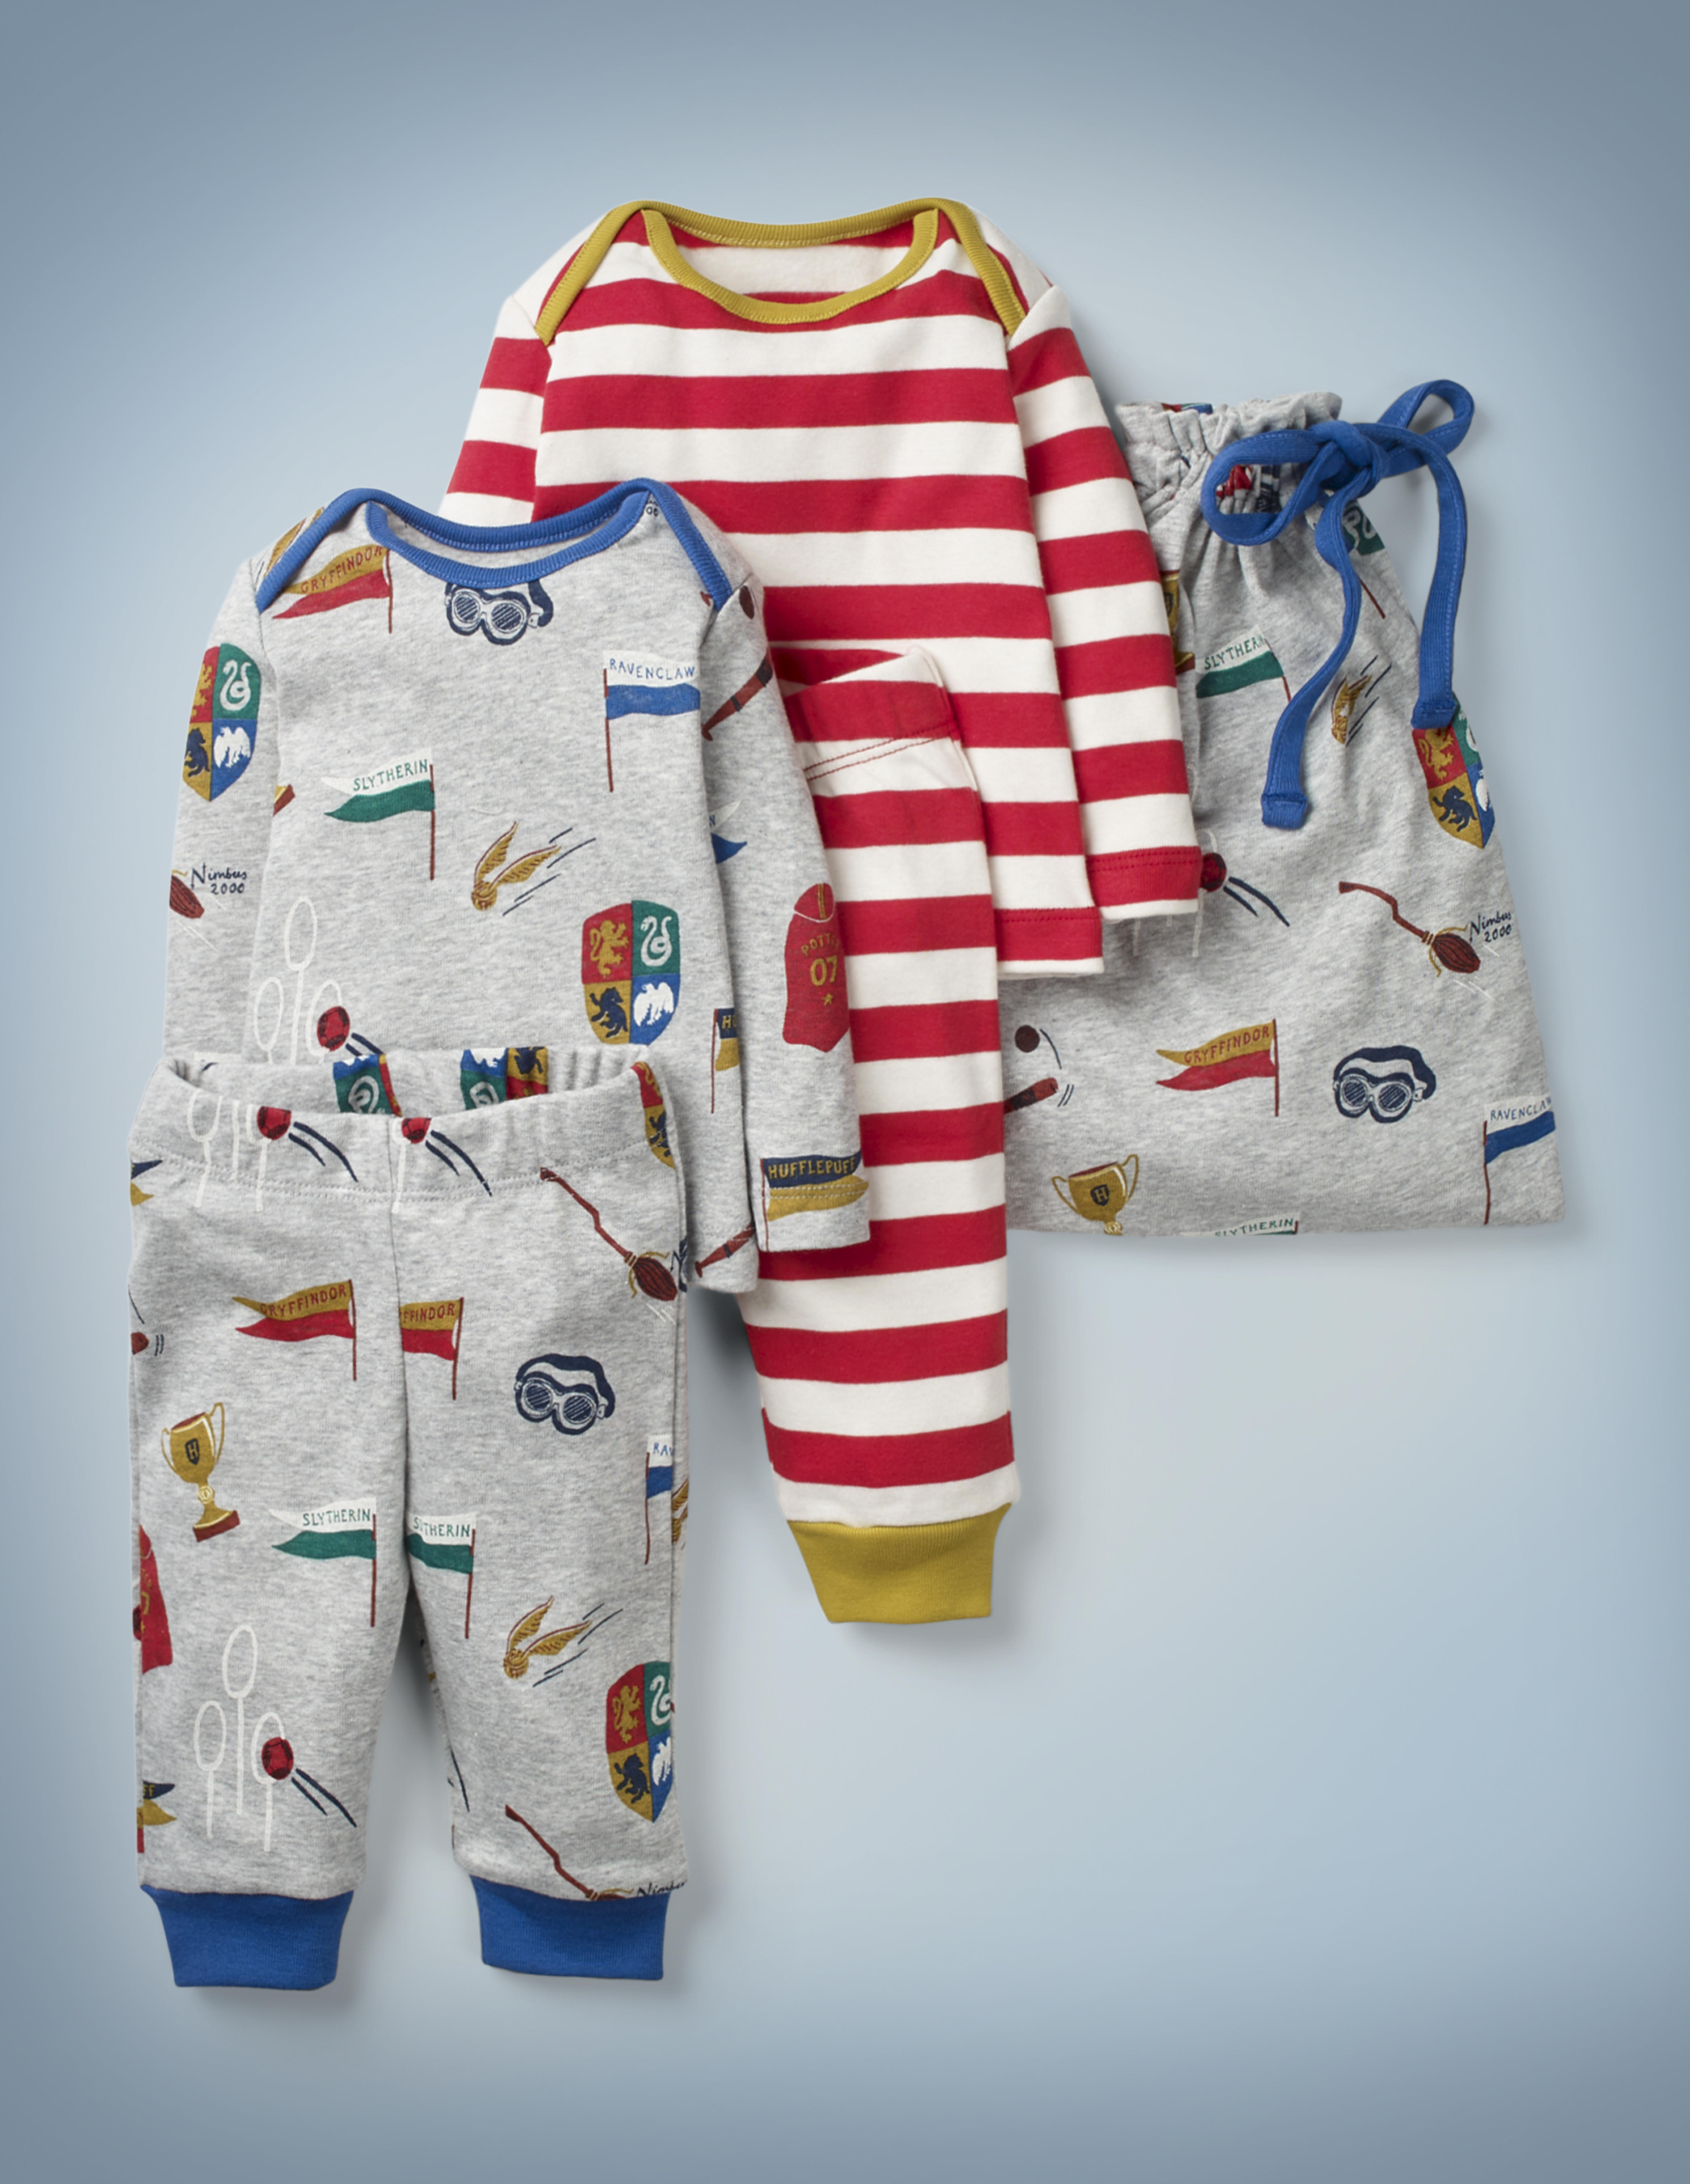 The Mini Boden Harry Potter Play Set, multi, features two top-and-bottom play outfits – one gray and featuring all-over images of Quidditch-related items, one with all-over red-and-white stripes and gold collar and pant cuffs – and a gray drawstring bag featuring Quidditch items. It retails between £35 and £38.